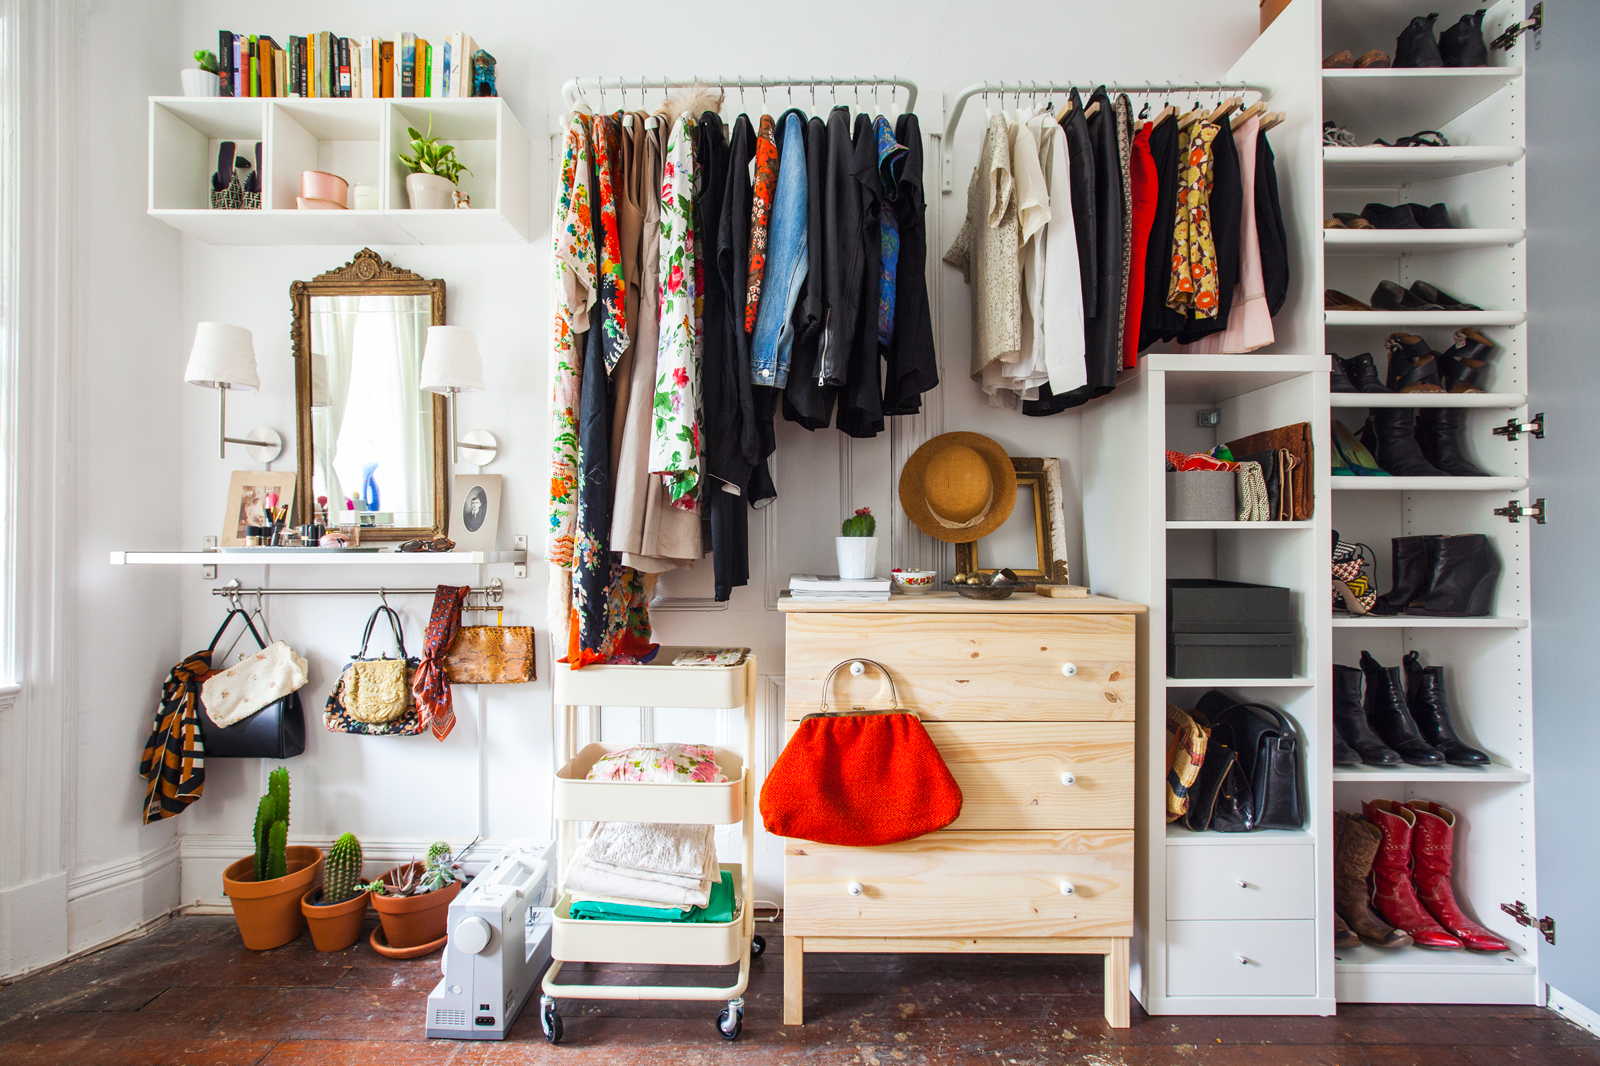 No Closets No Problem. Here's How To Live Without Them